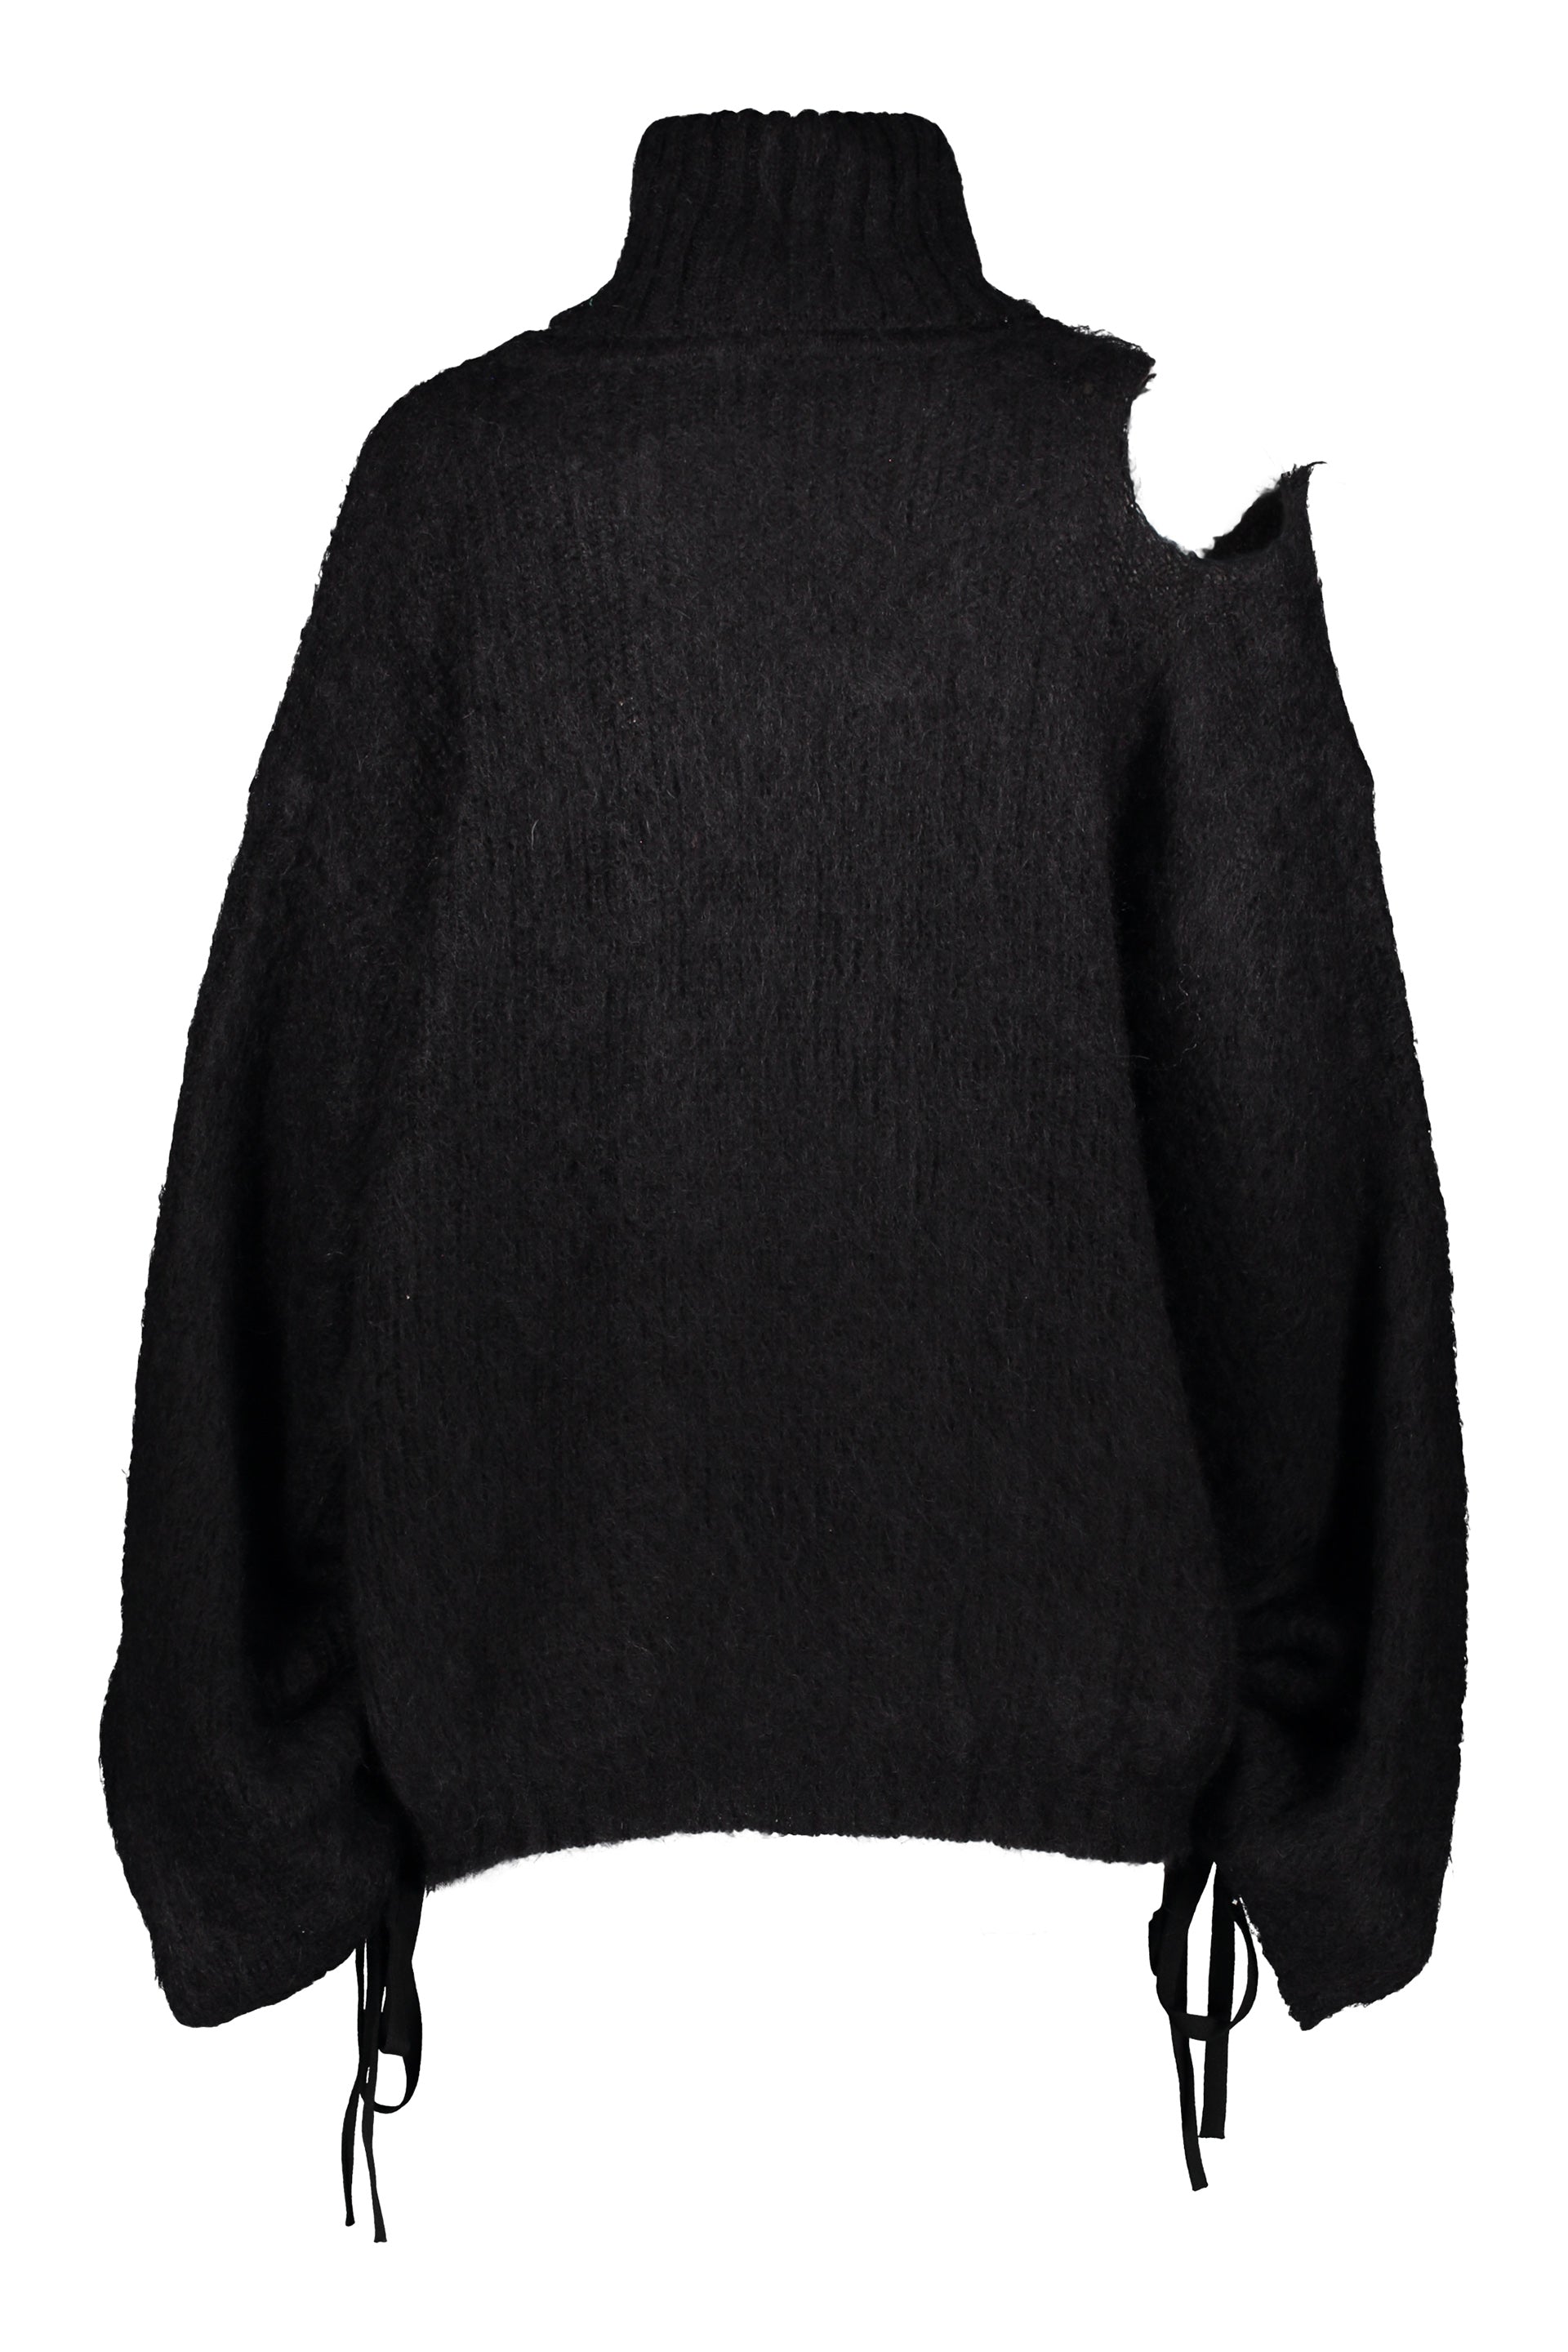 ANDREADAMO-OUTLET-SALE-Turtleneck-sweater-Strick-LXL-ARCHIVE-COLLECTION-2.jpg